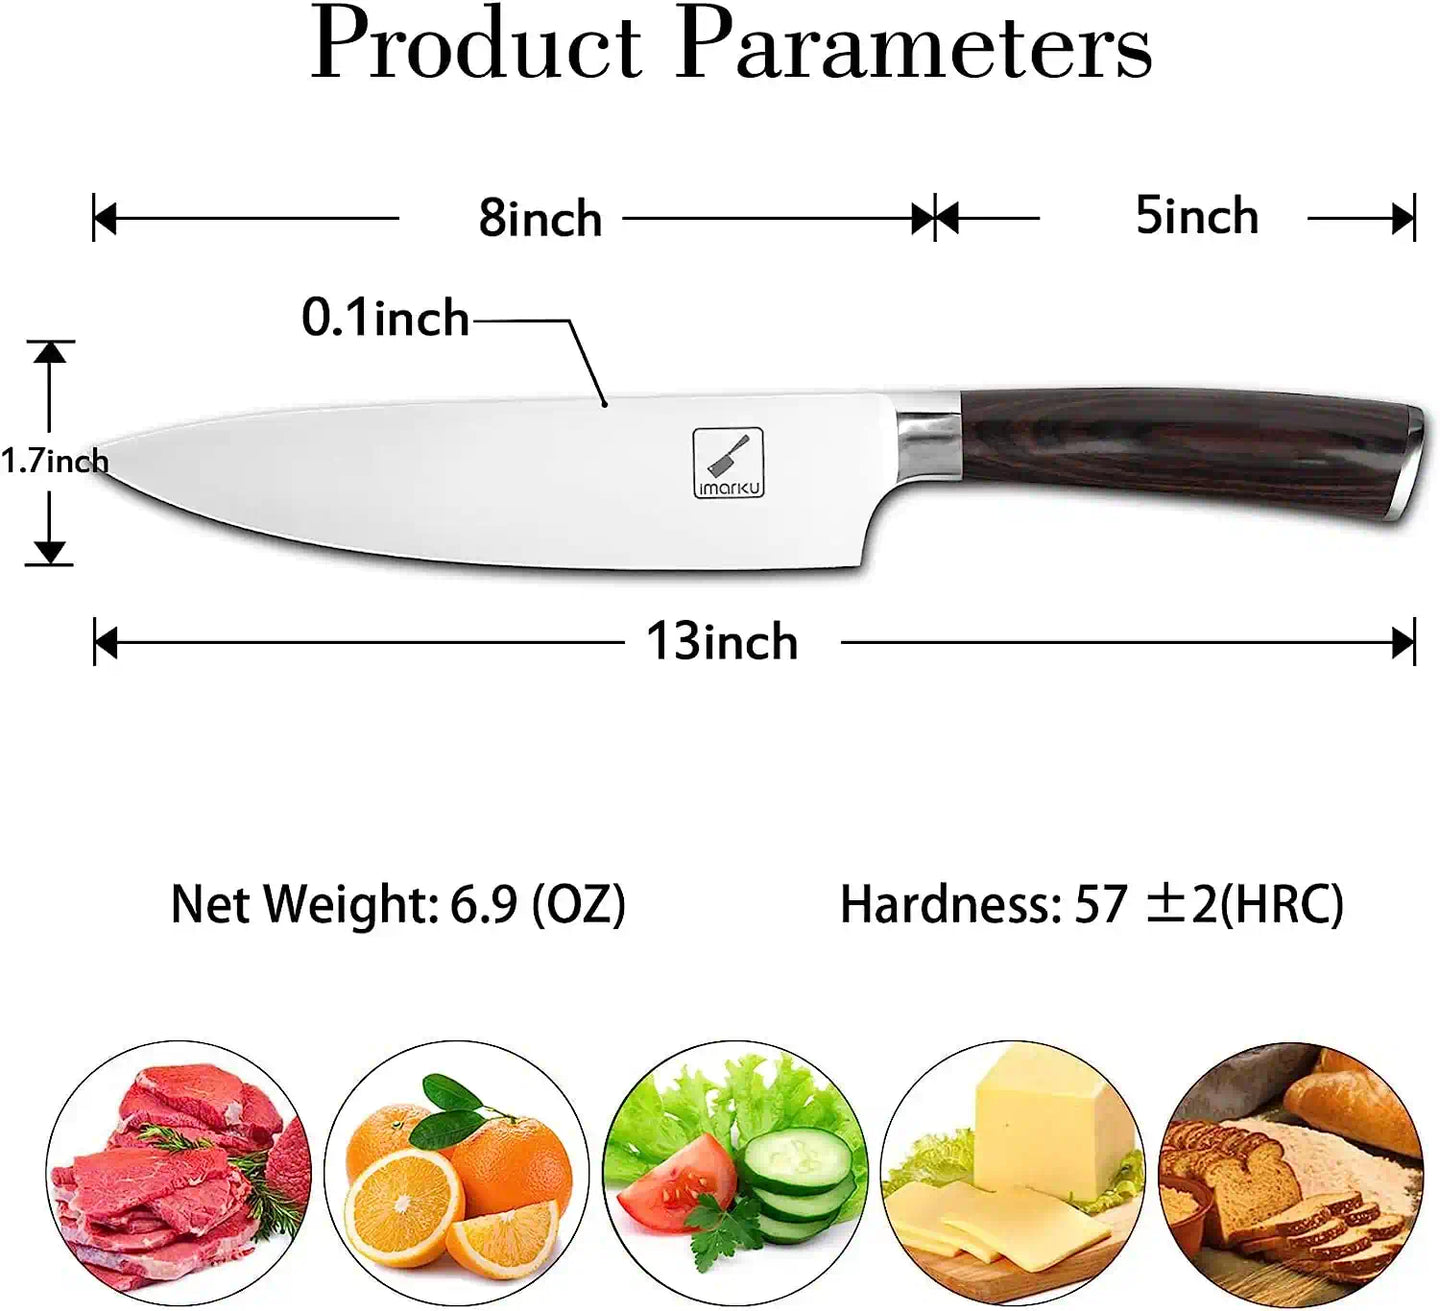 8 inch chef's knife